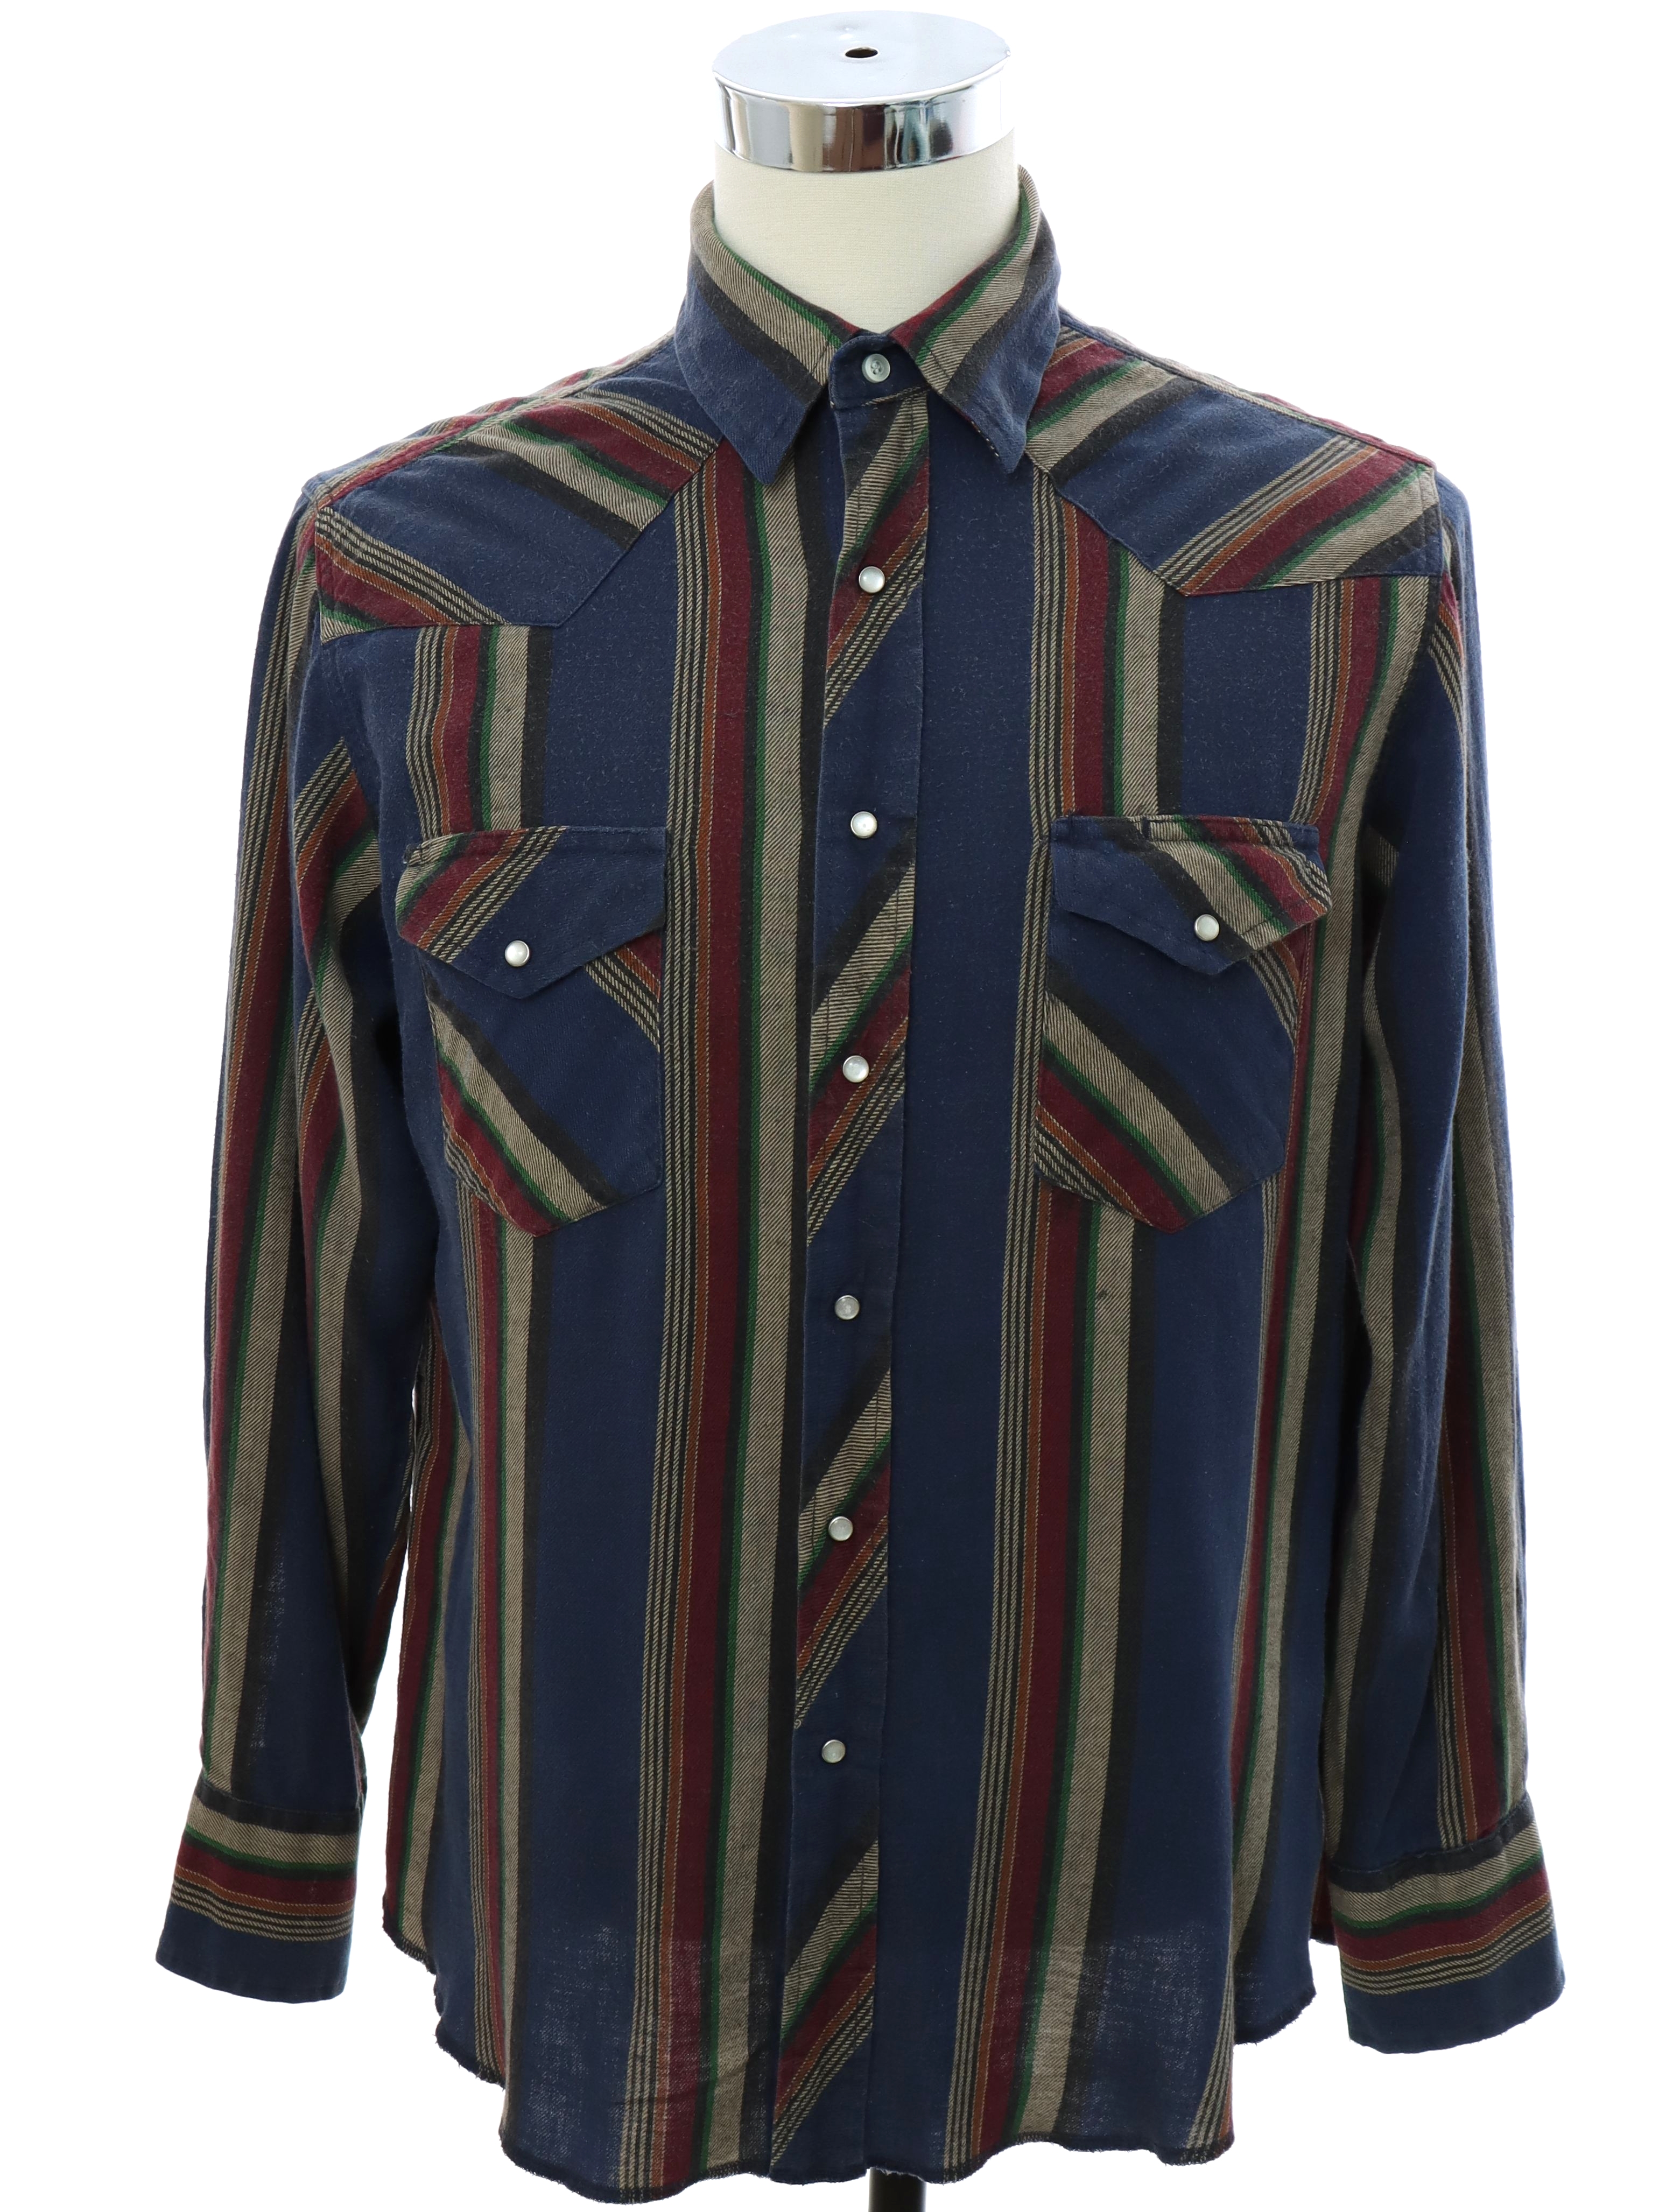 Western Shirt: 90s -Wrangler- Mens faded navy, burgundy, black, brown, and  green striped cotton flannel longsleeve western shirt. (Made in Bangladesh)  pearlized snaps at front placket and cuffs. Fold over collar, front